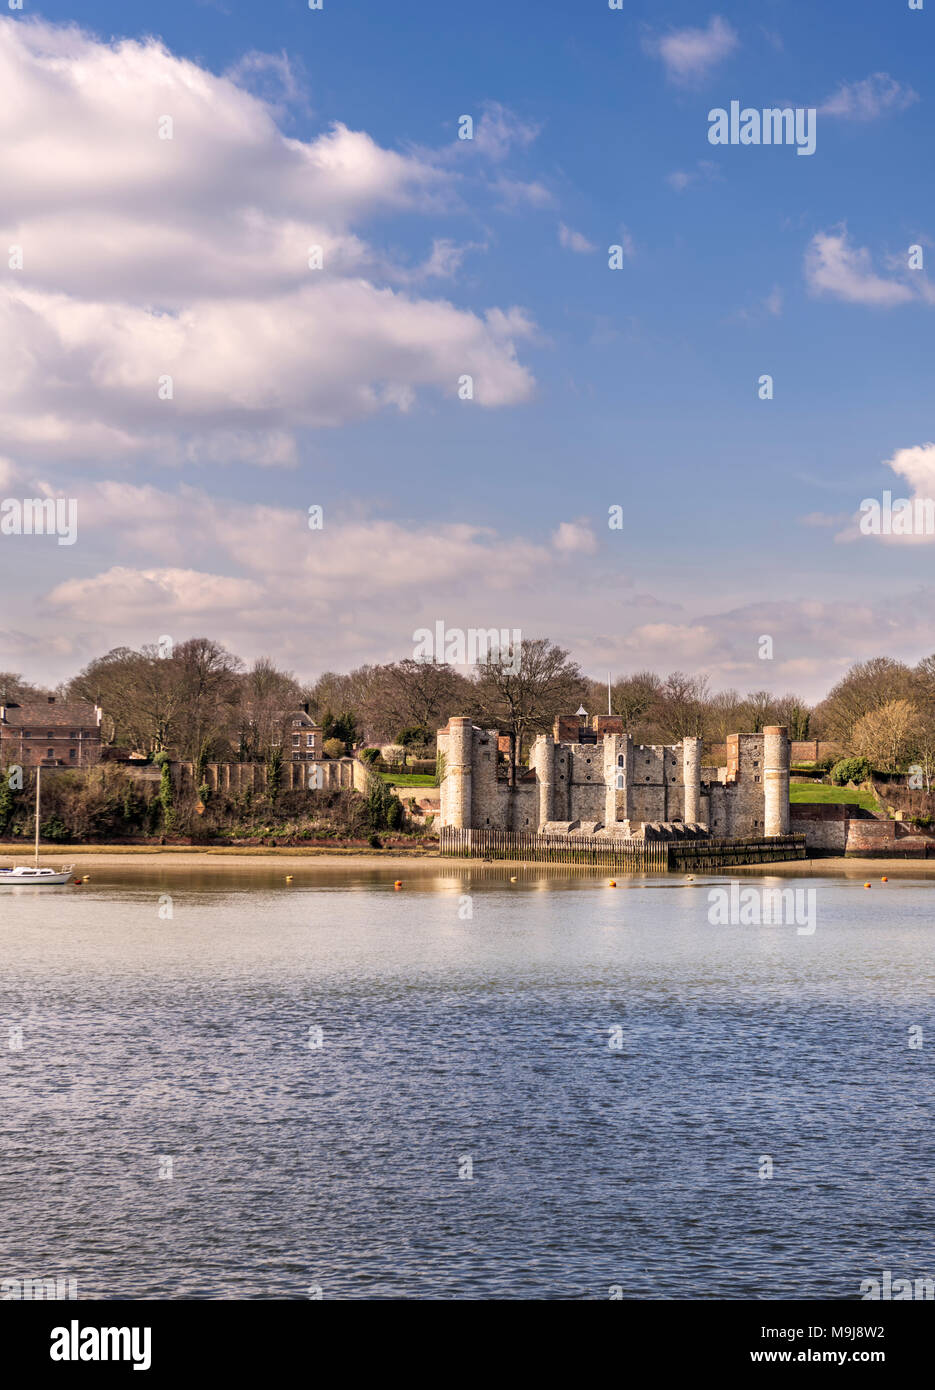 Upnor castle, a 16th century fortification situated on the river Medway at Chatham, Kent Stock Photo